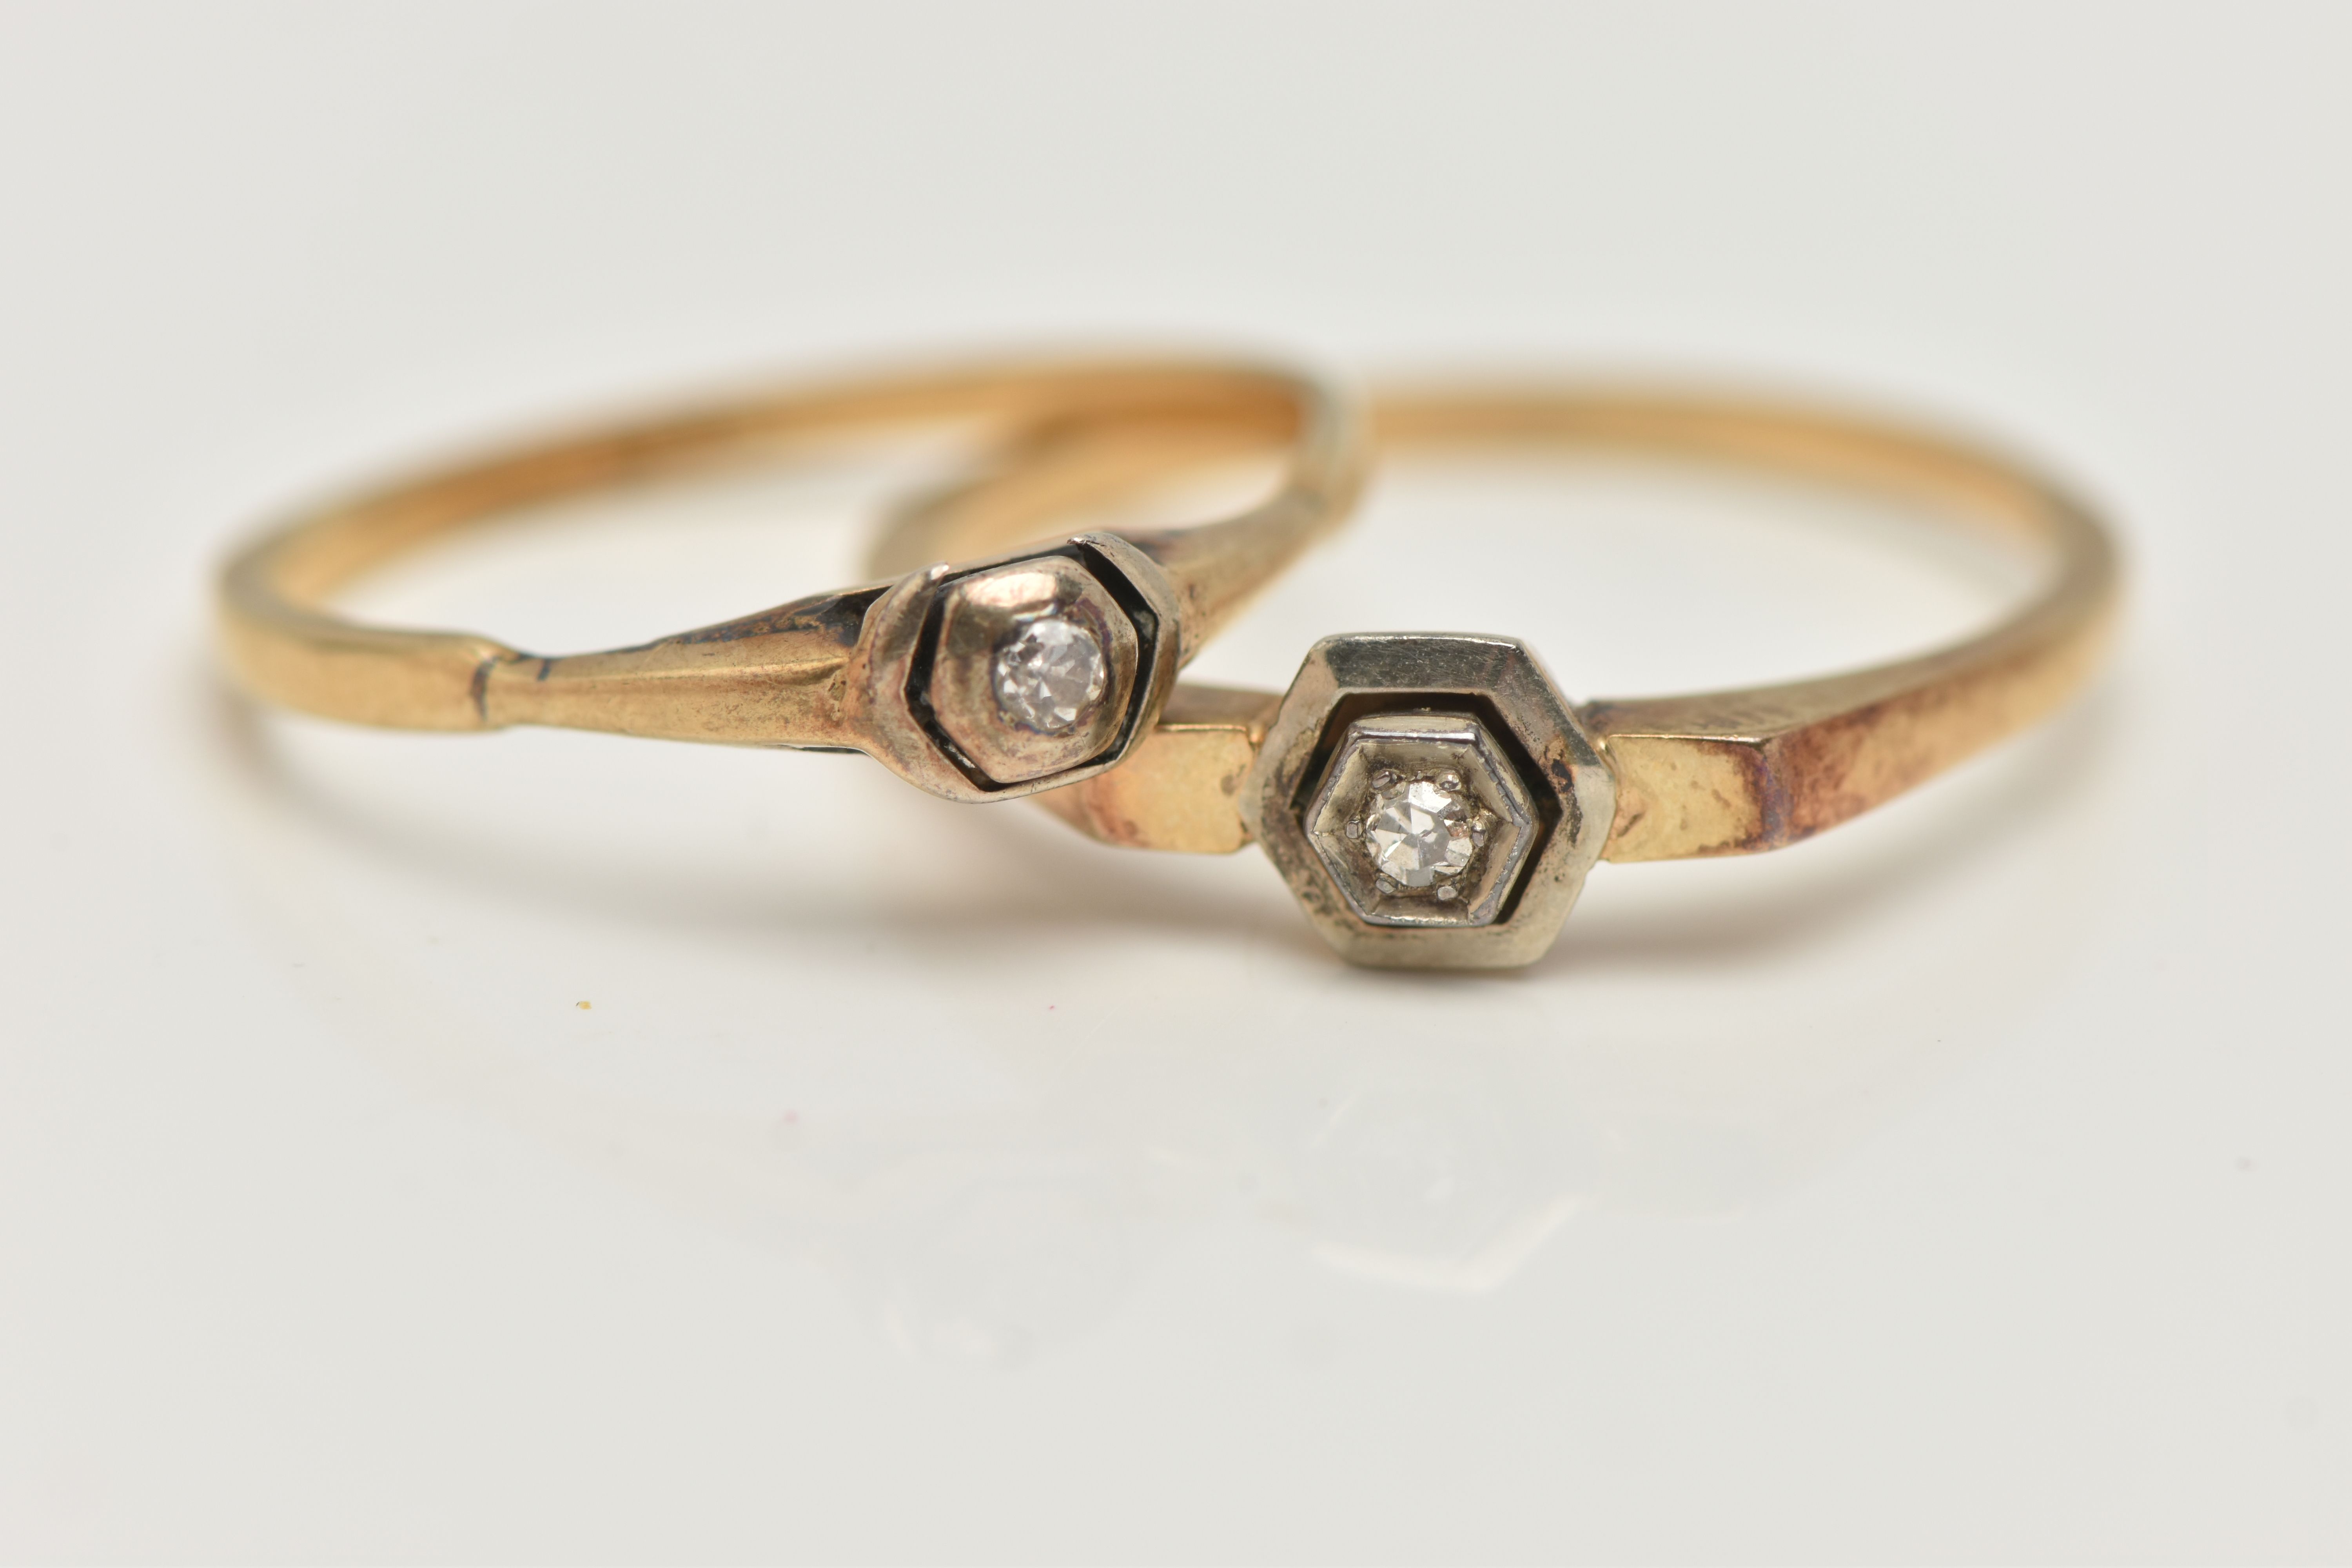 TWO DIAMOND RINGS, both set with single cut diamonds, with outer hexagonal settings, one stamped